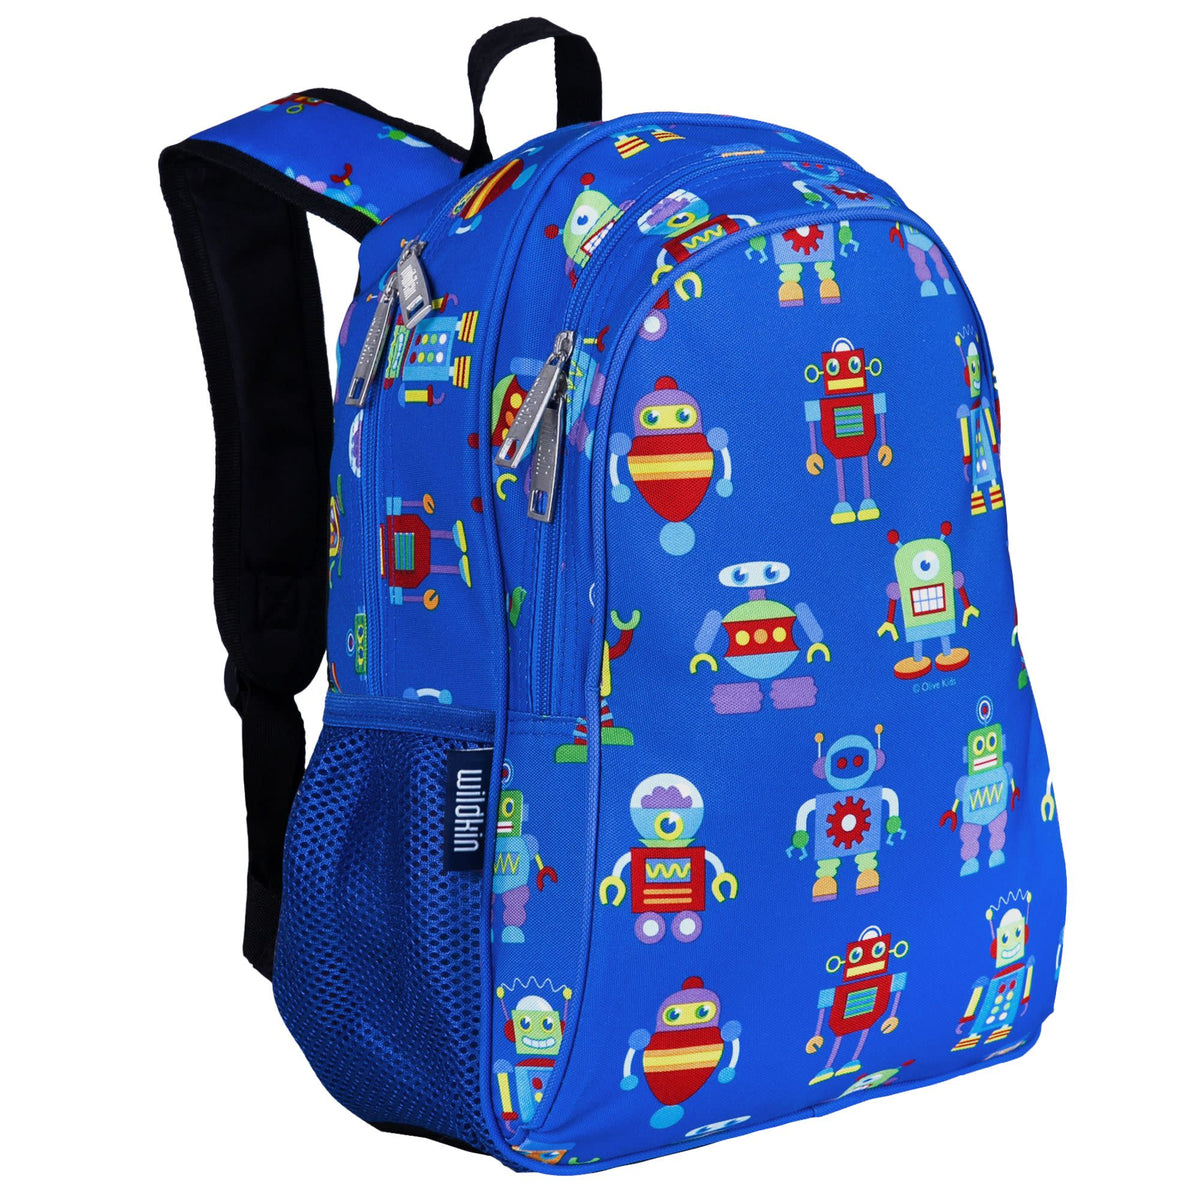 Robots Backpack - 15 inch